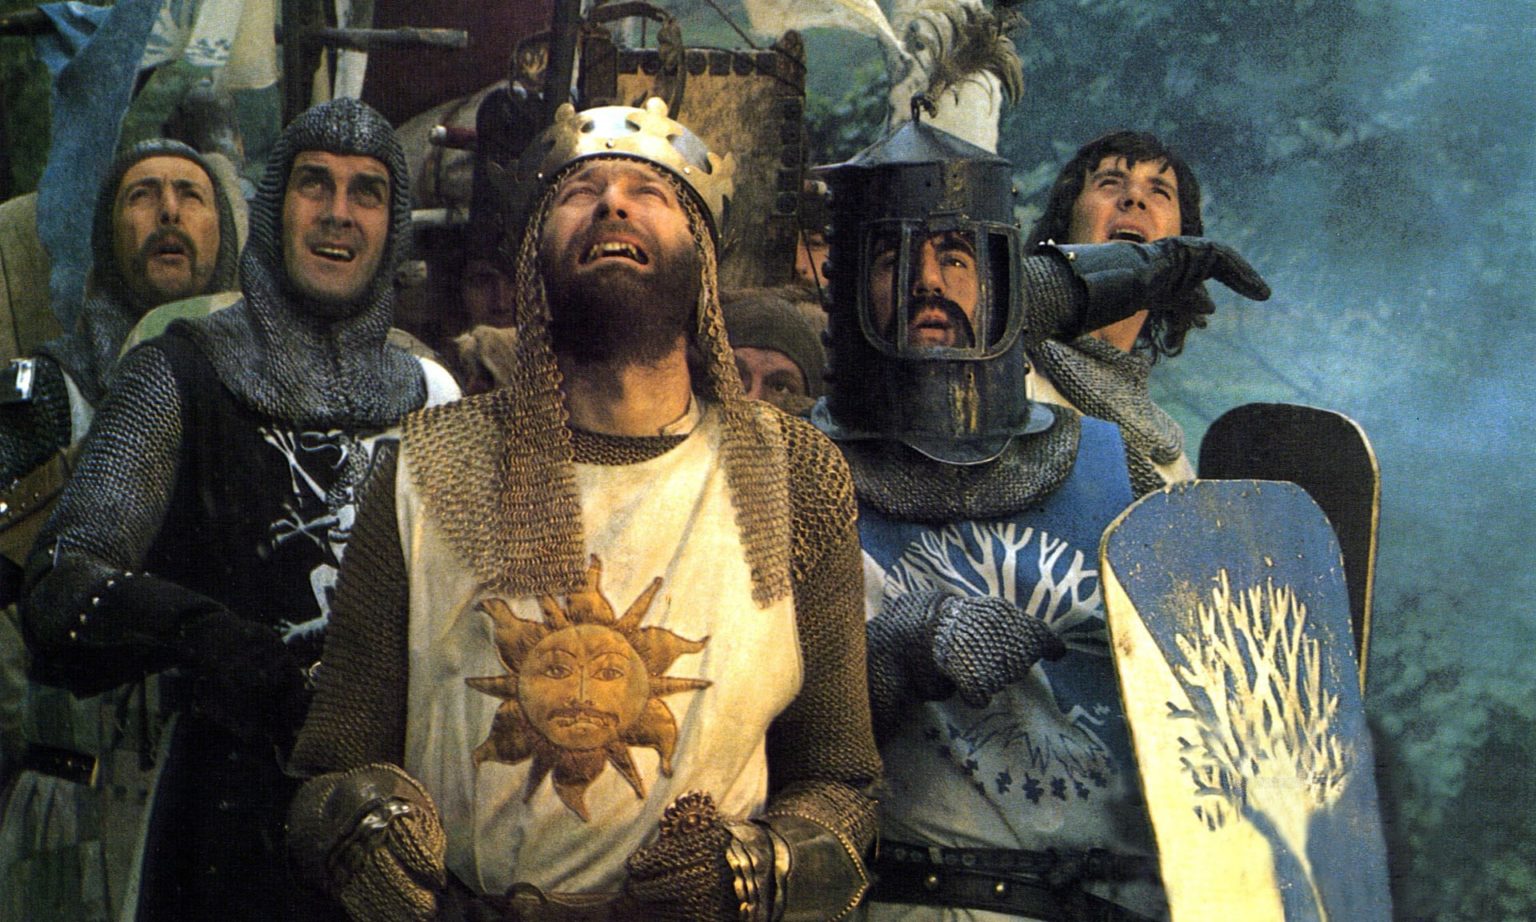 ۳- Monty Python and the Holy Grail